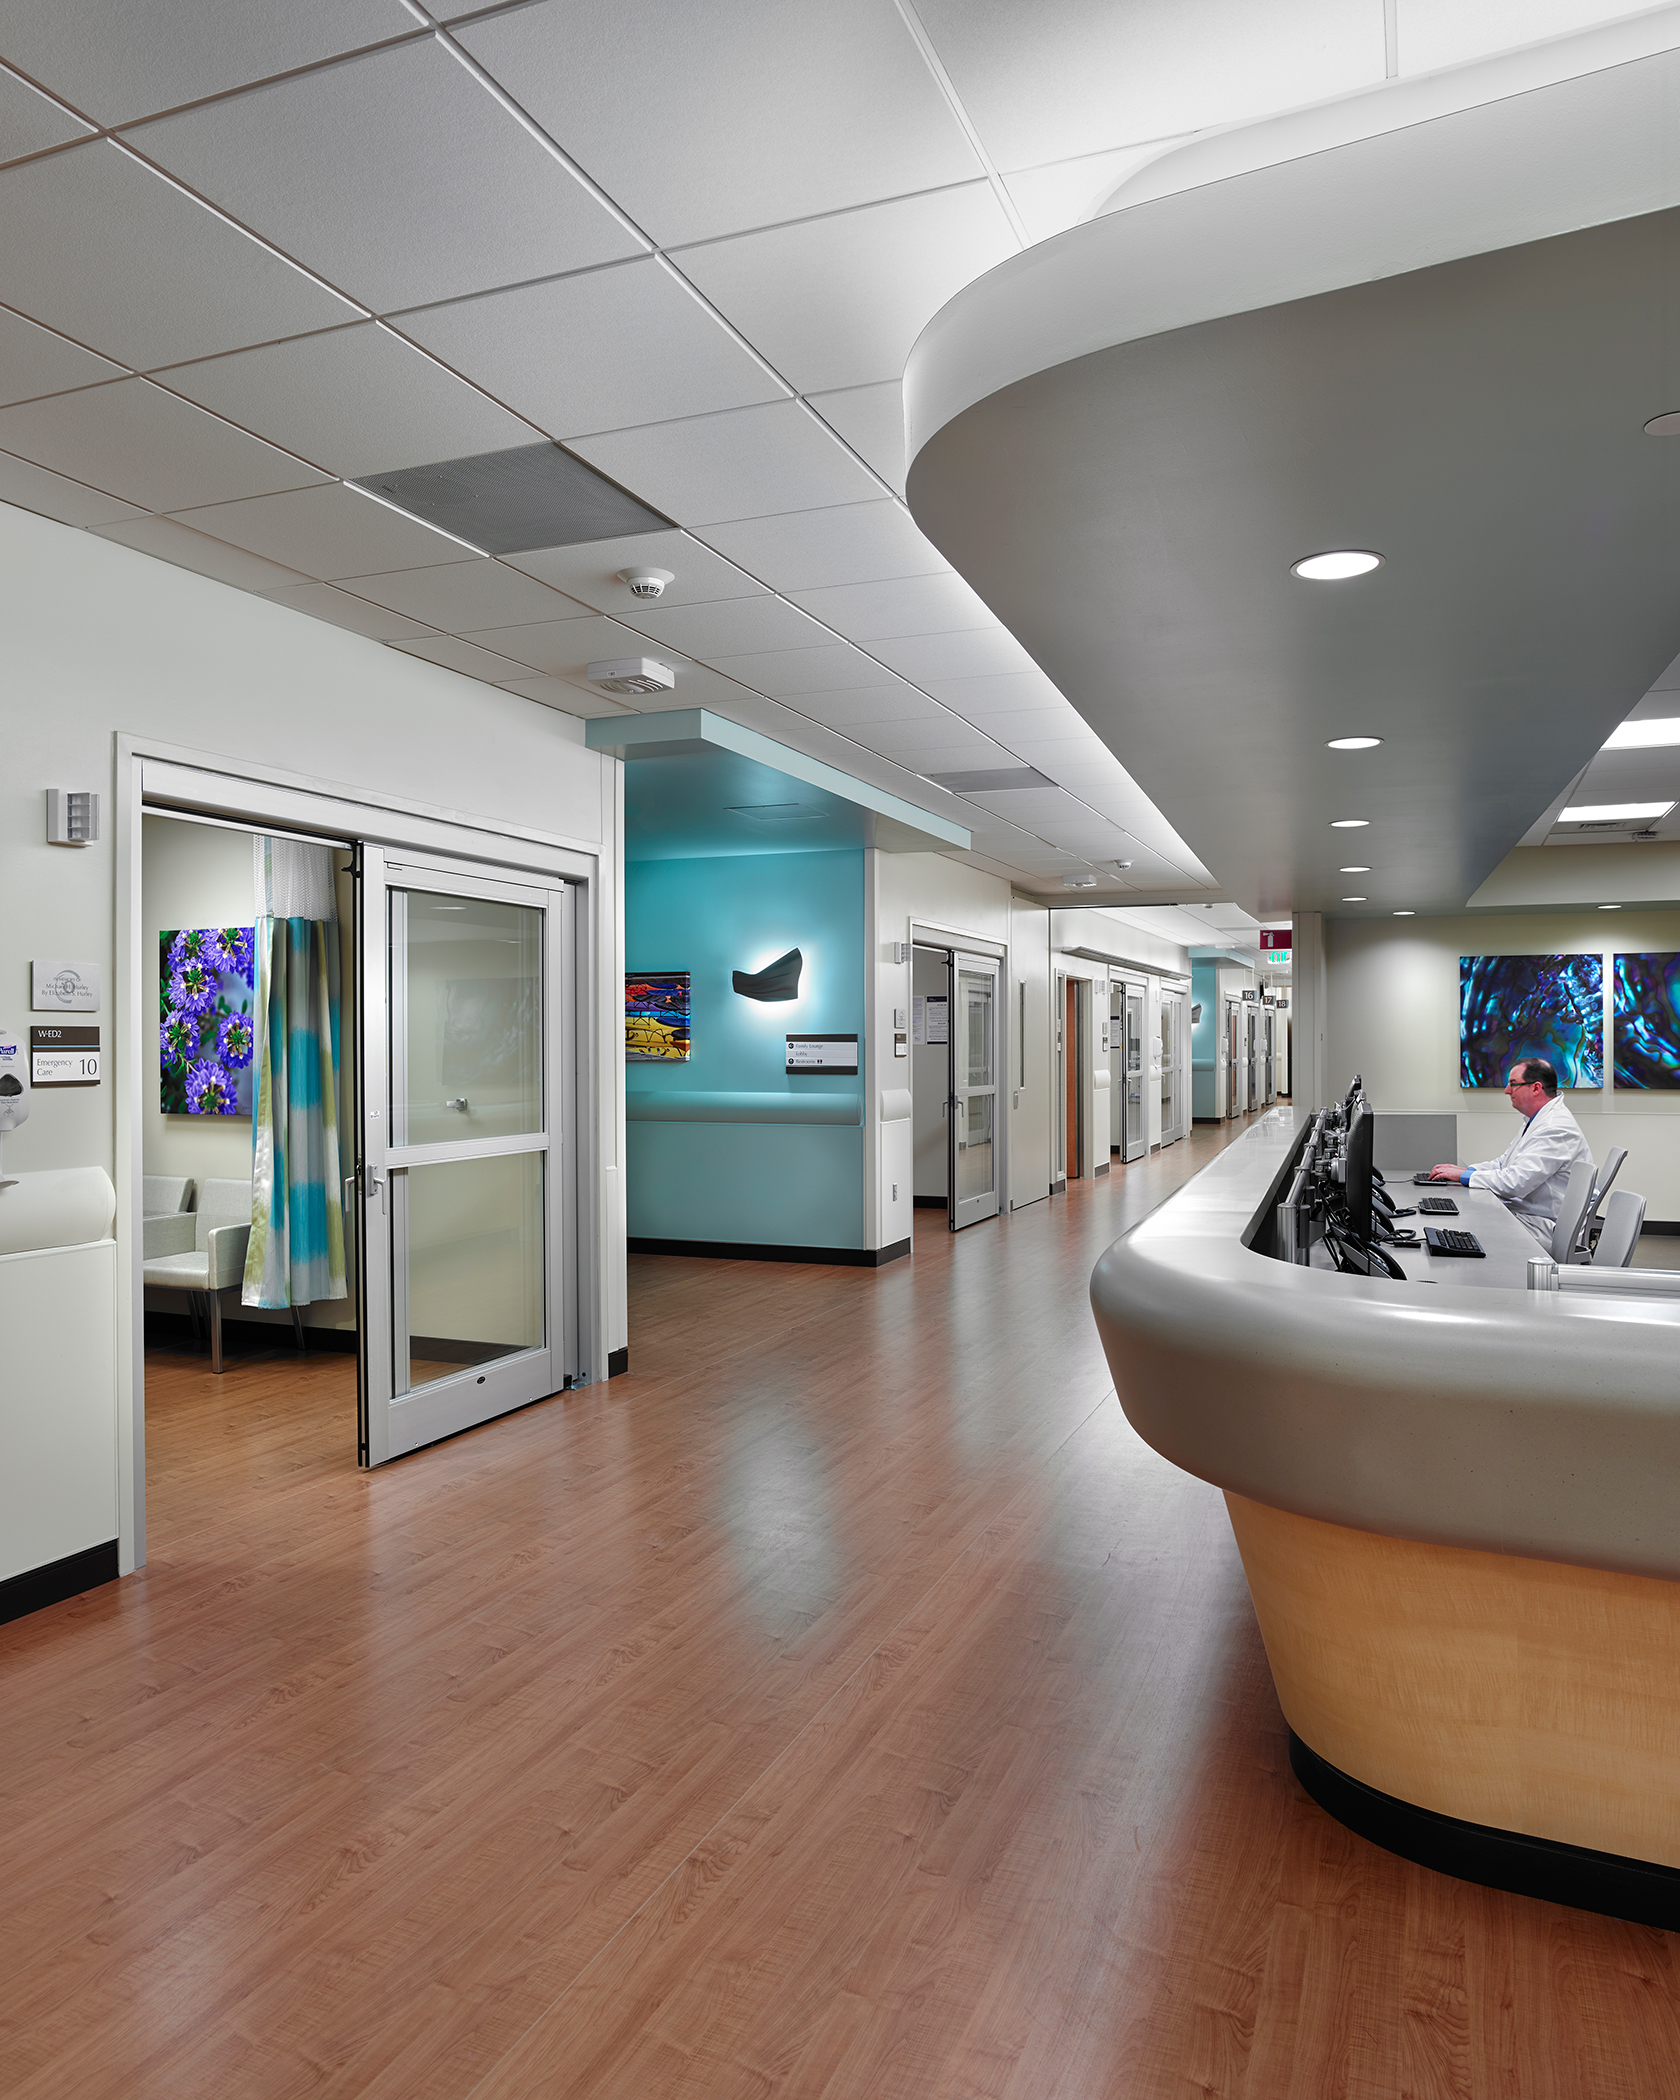 large rooms that house critically ill patients